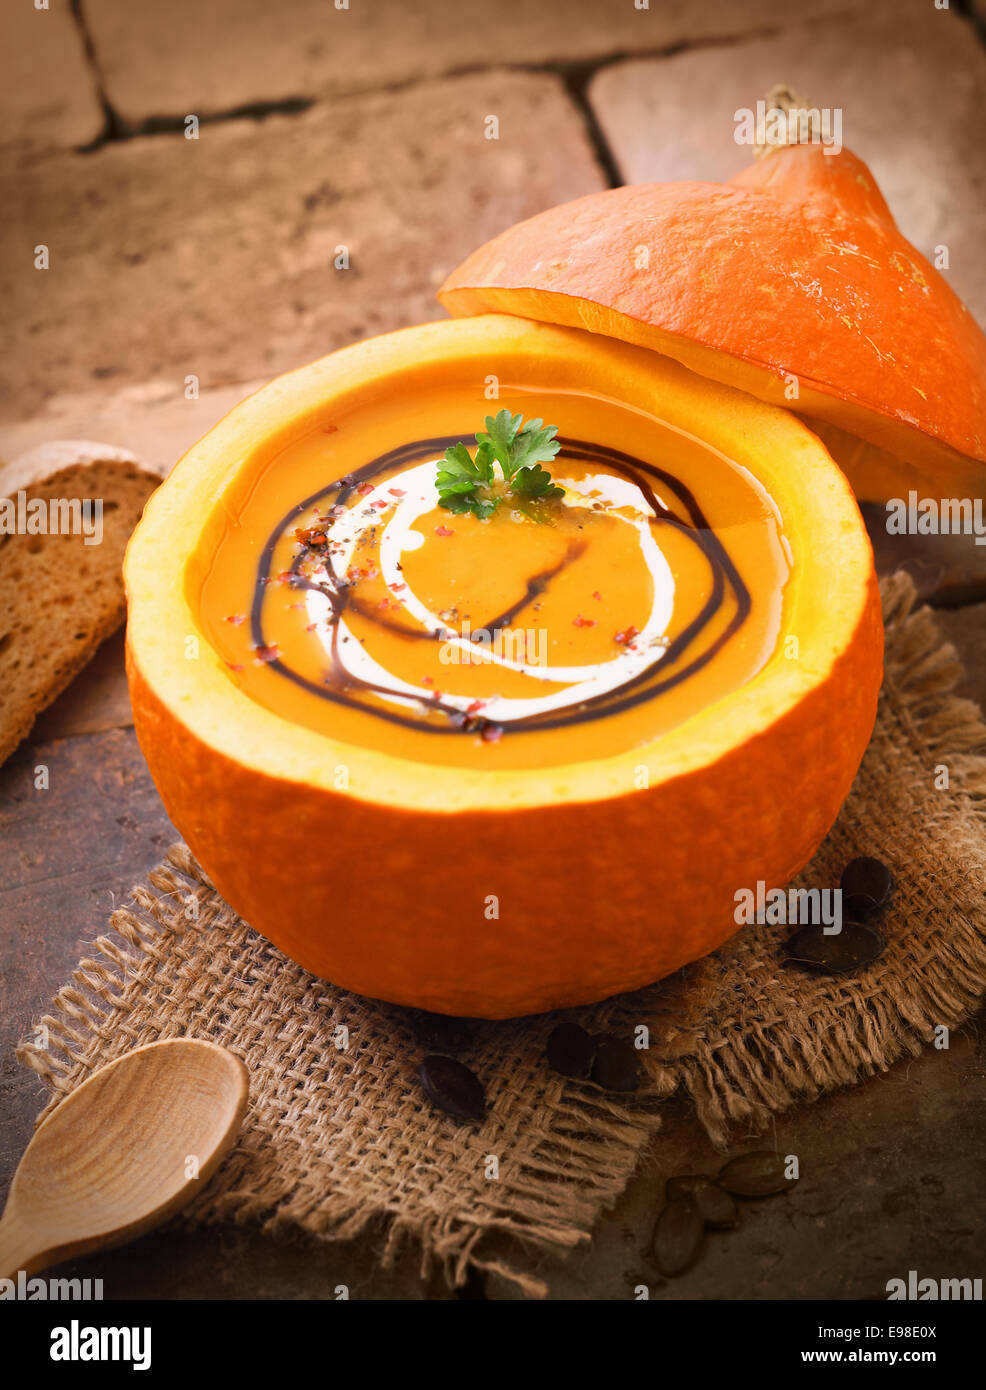 Delicious pumpkin or butternut soup served in the hollowed out gourd drizzled with cream and sauce for a hearty autumn meal Stock Photo